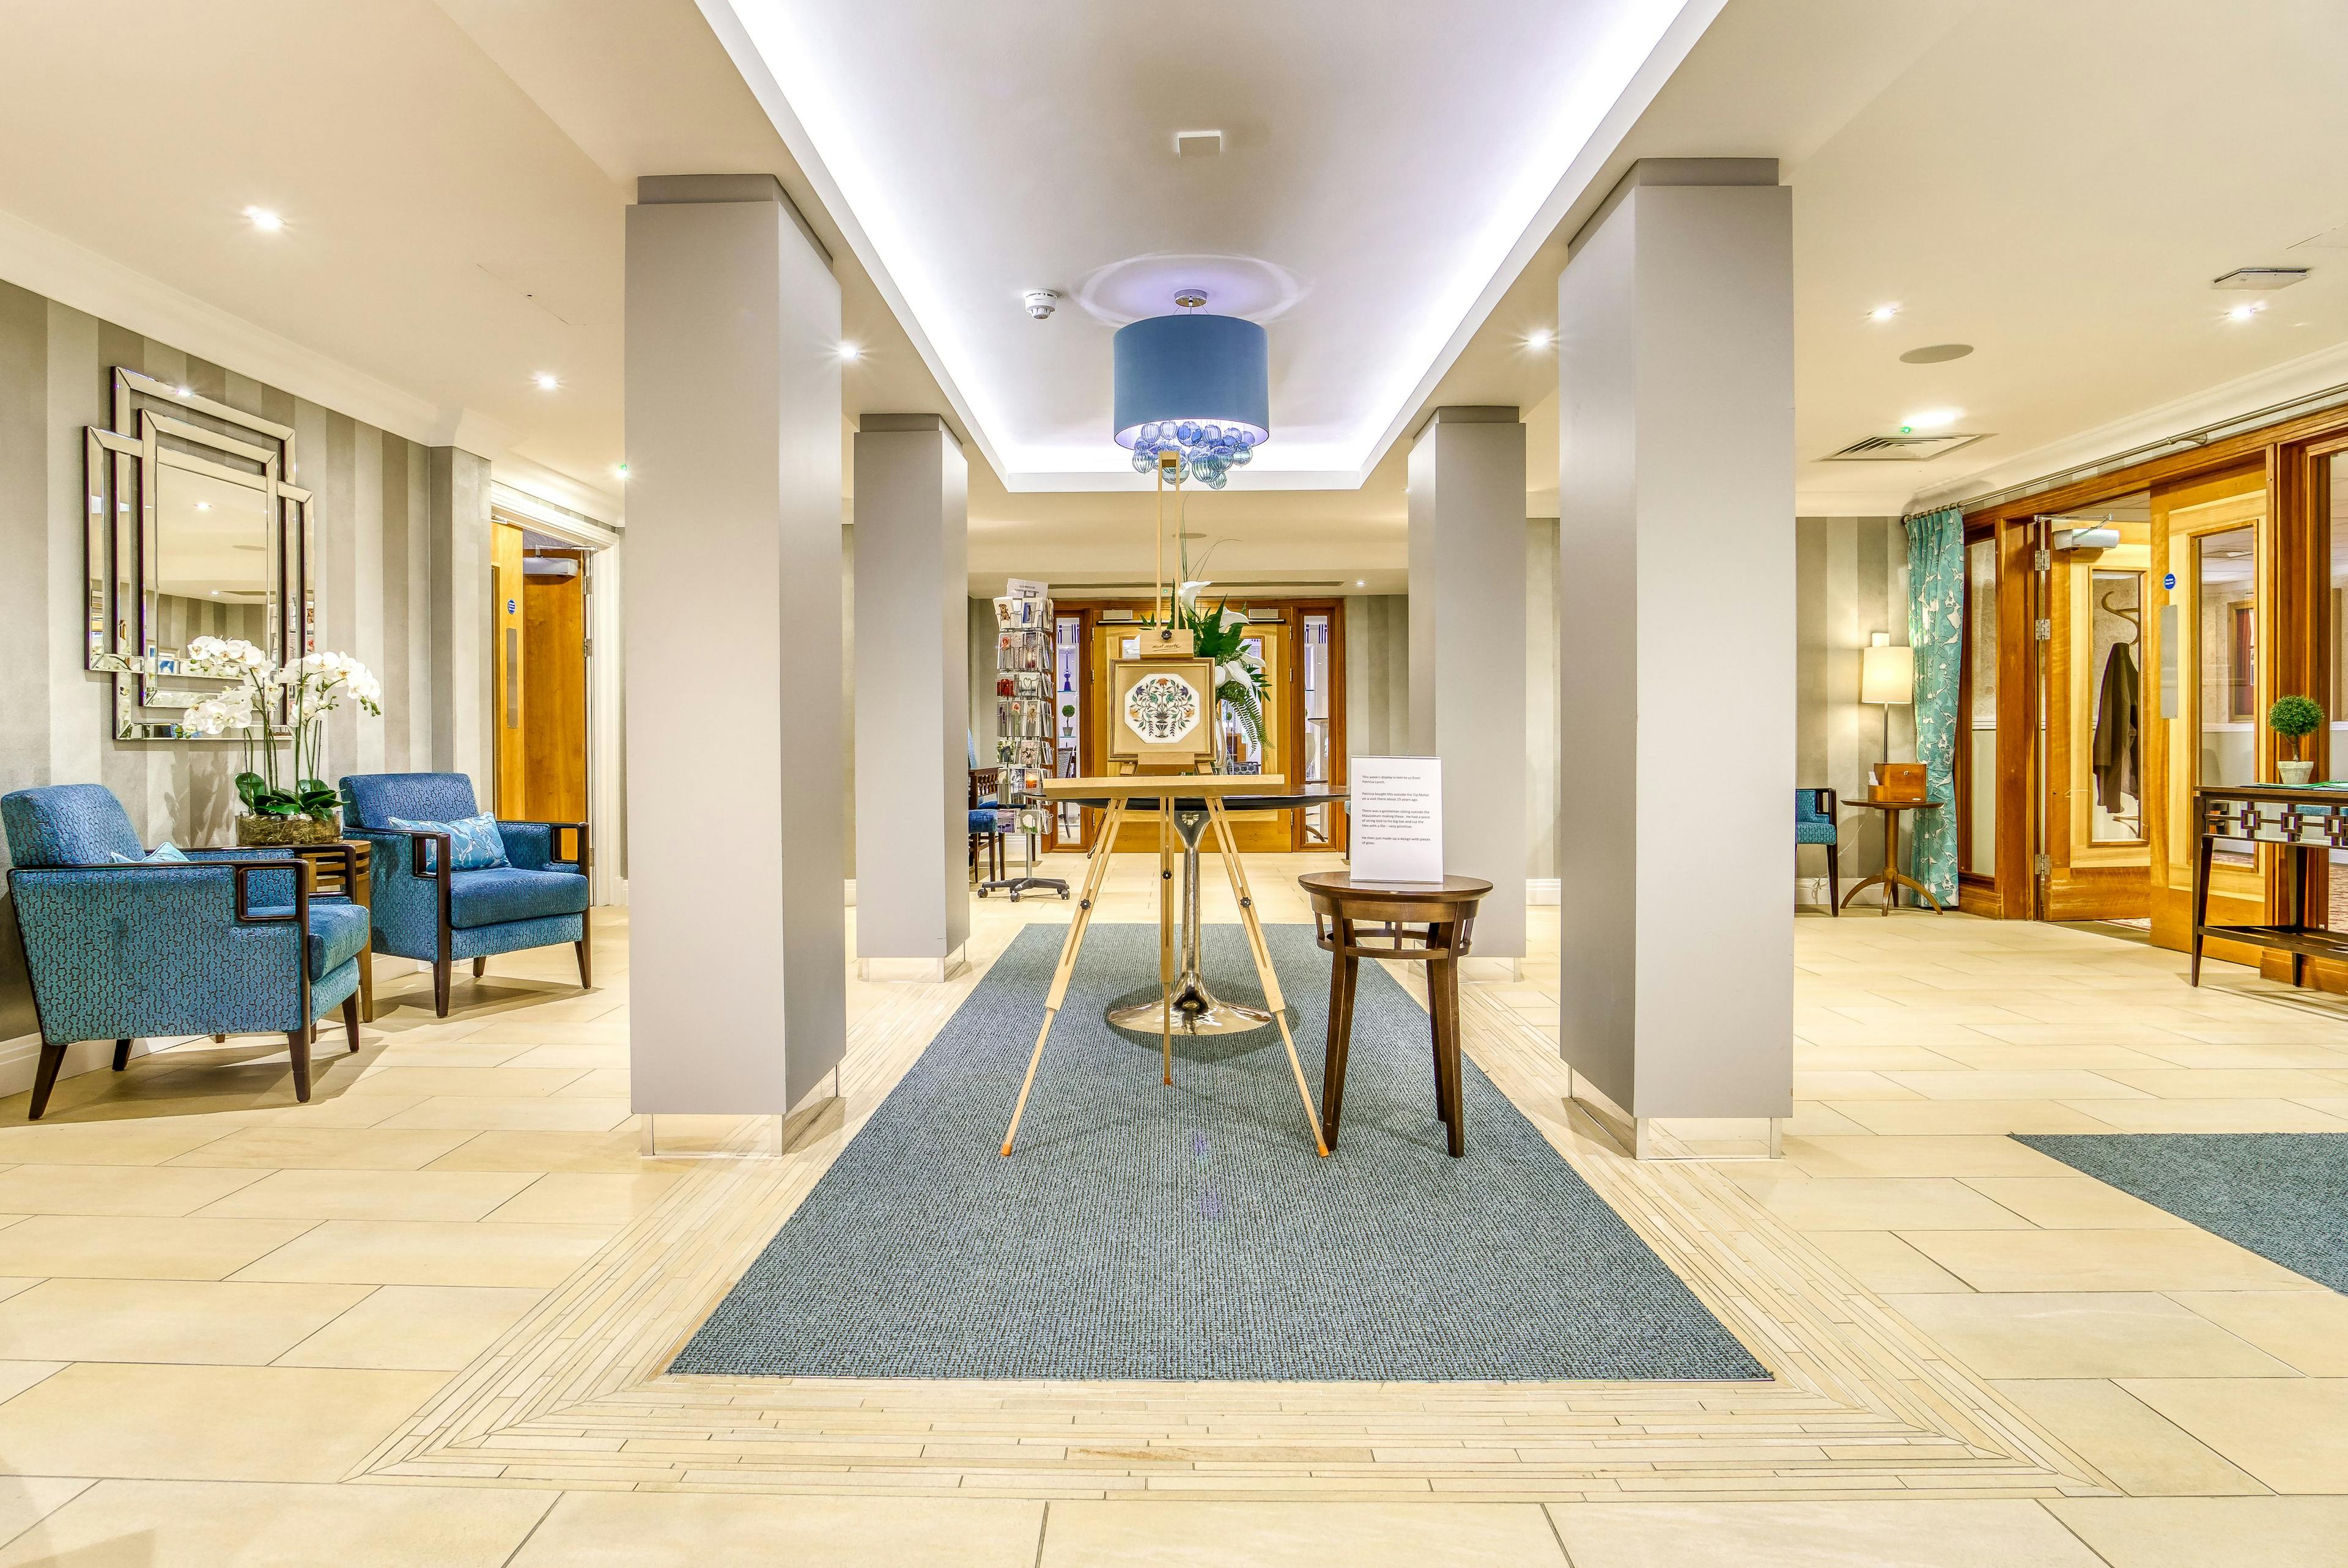 Reception of Painswick care home in Painswick, Gloucestershire